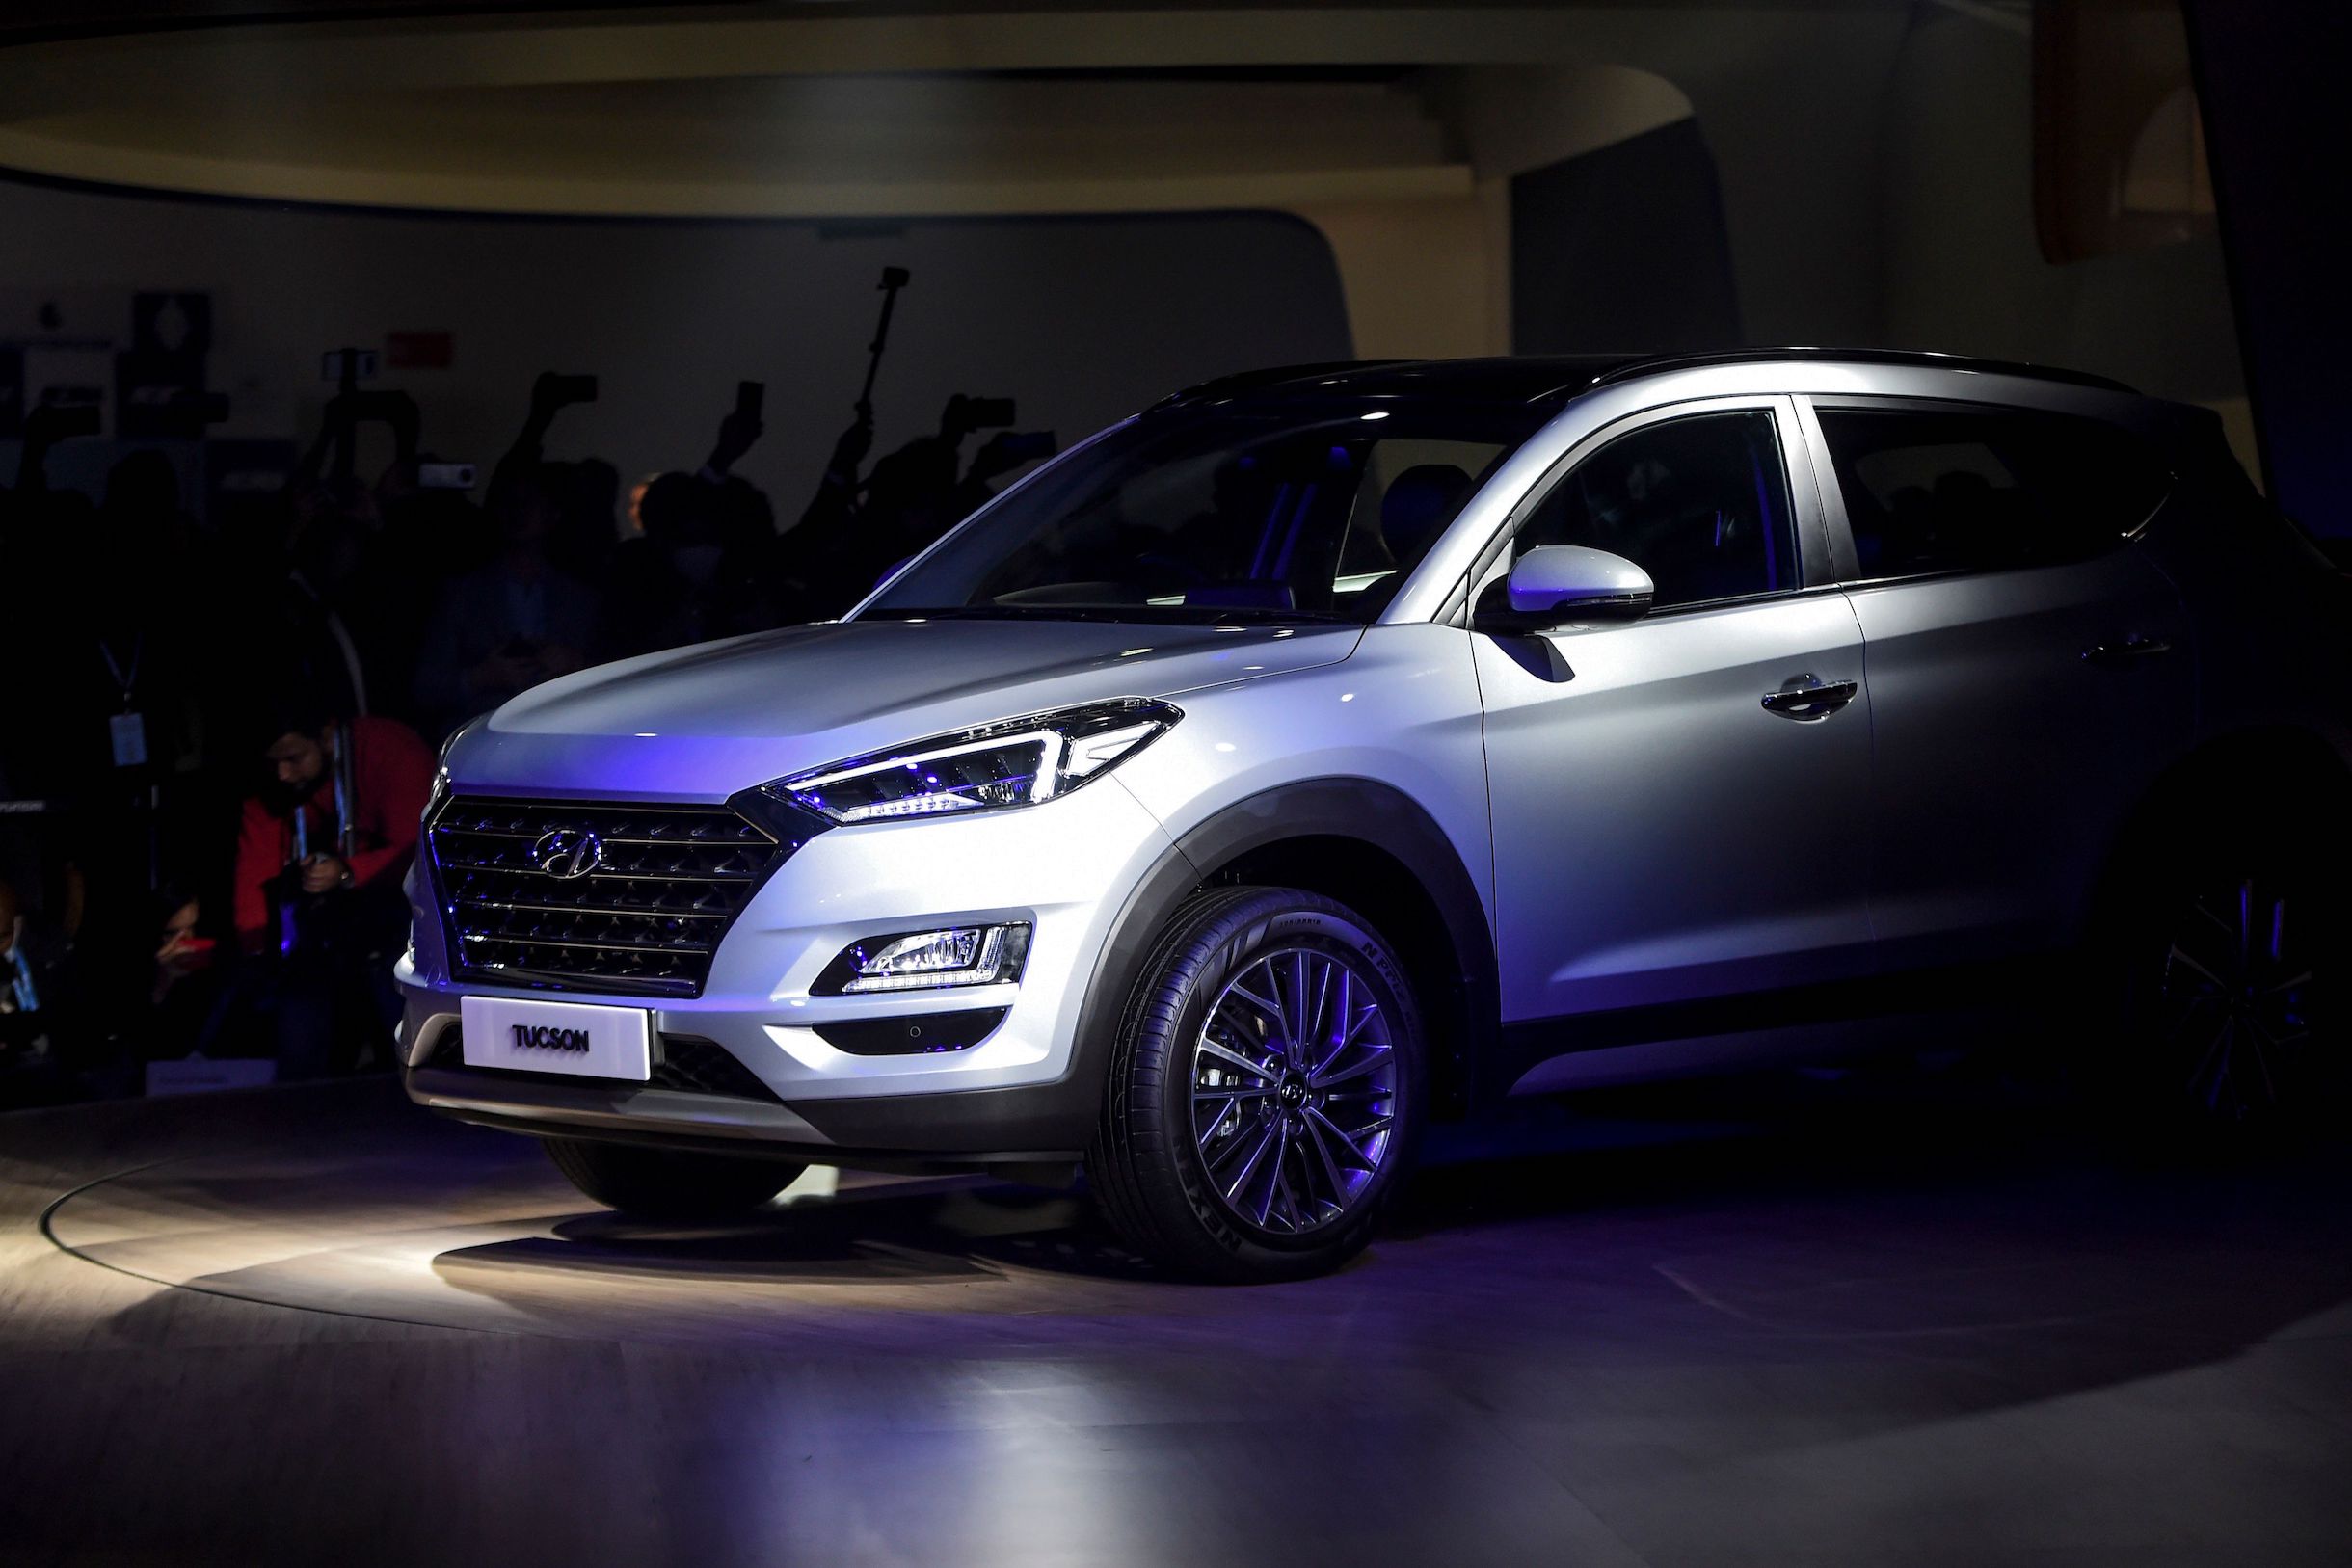 Hyundai Tucson car is displayed on stage after its launch at the Auto Expo 2020 at Greater Noida